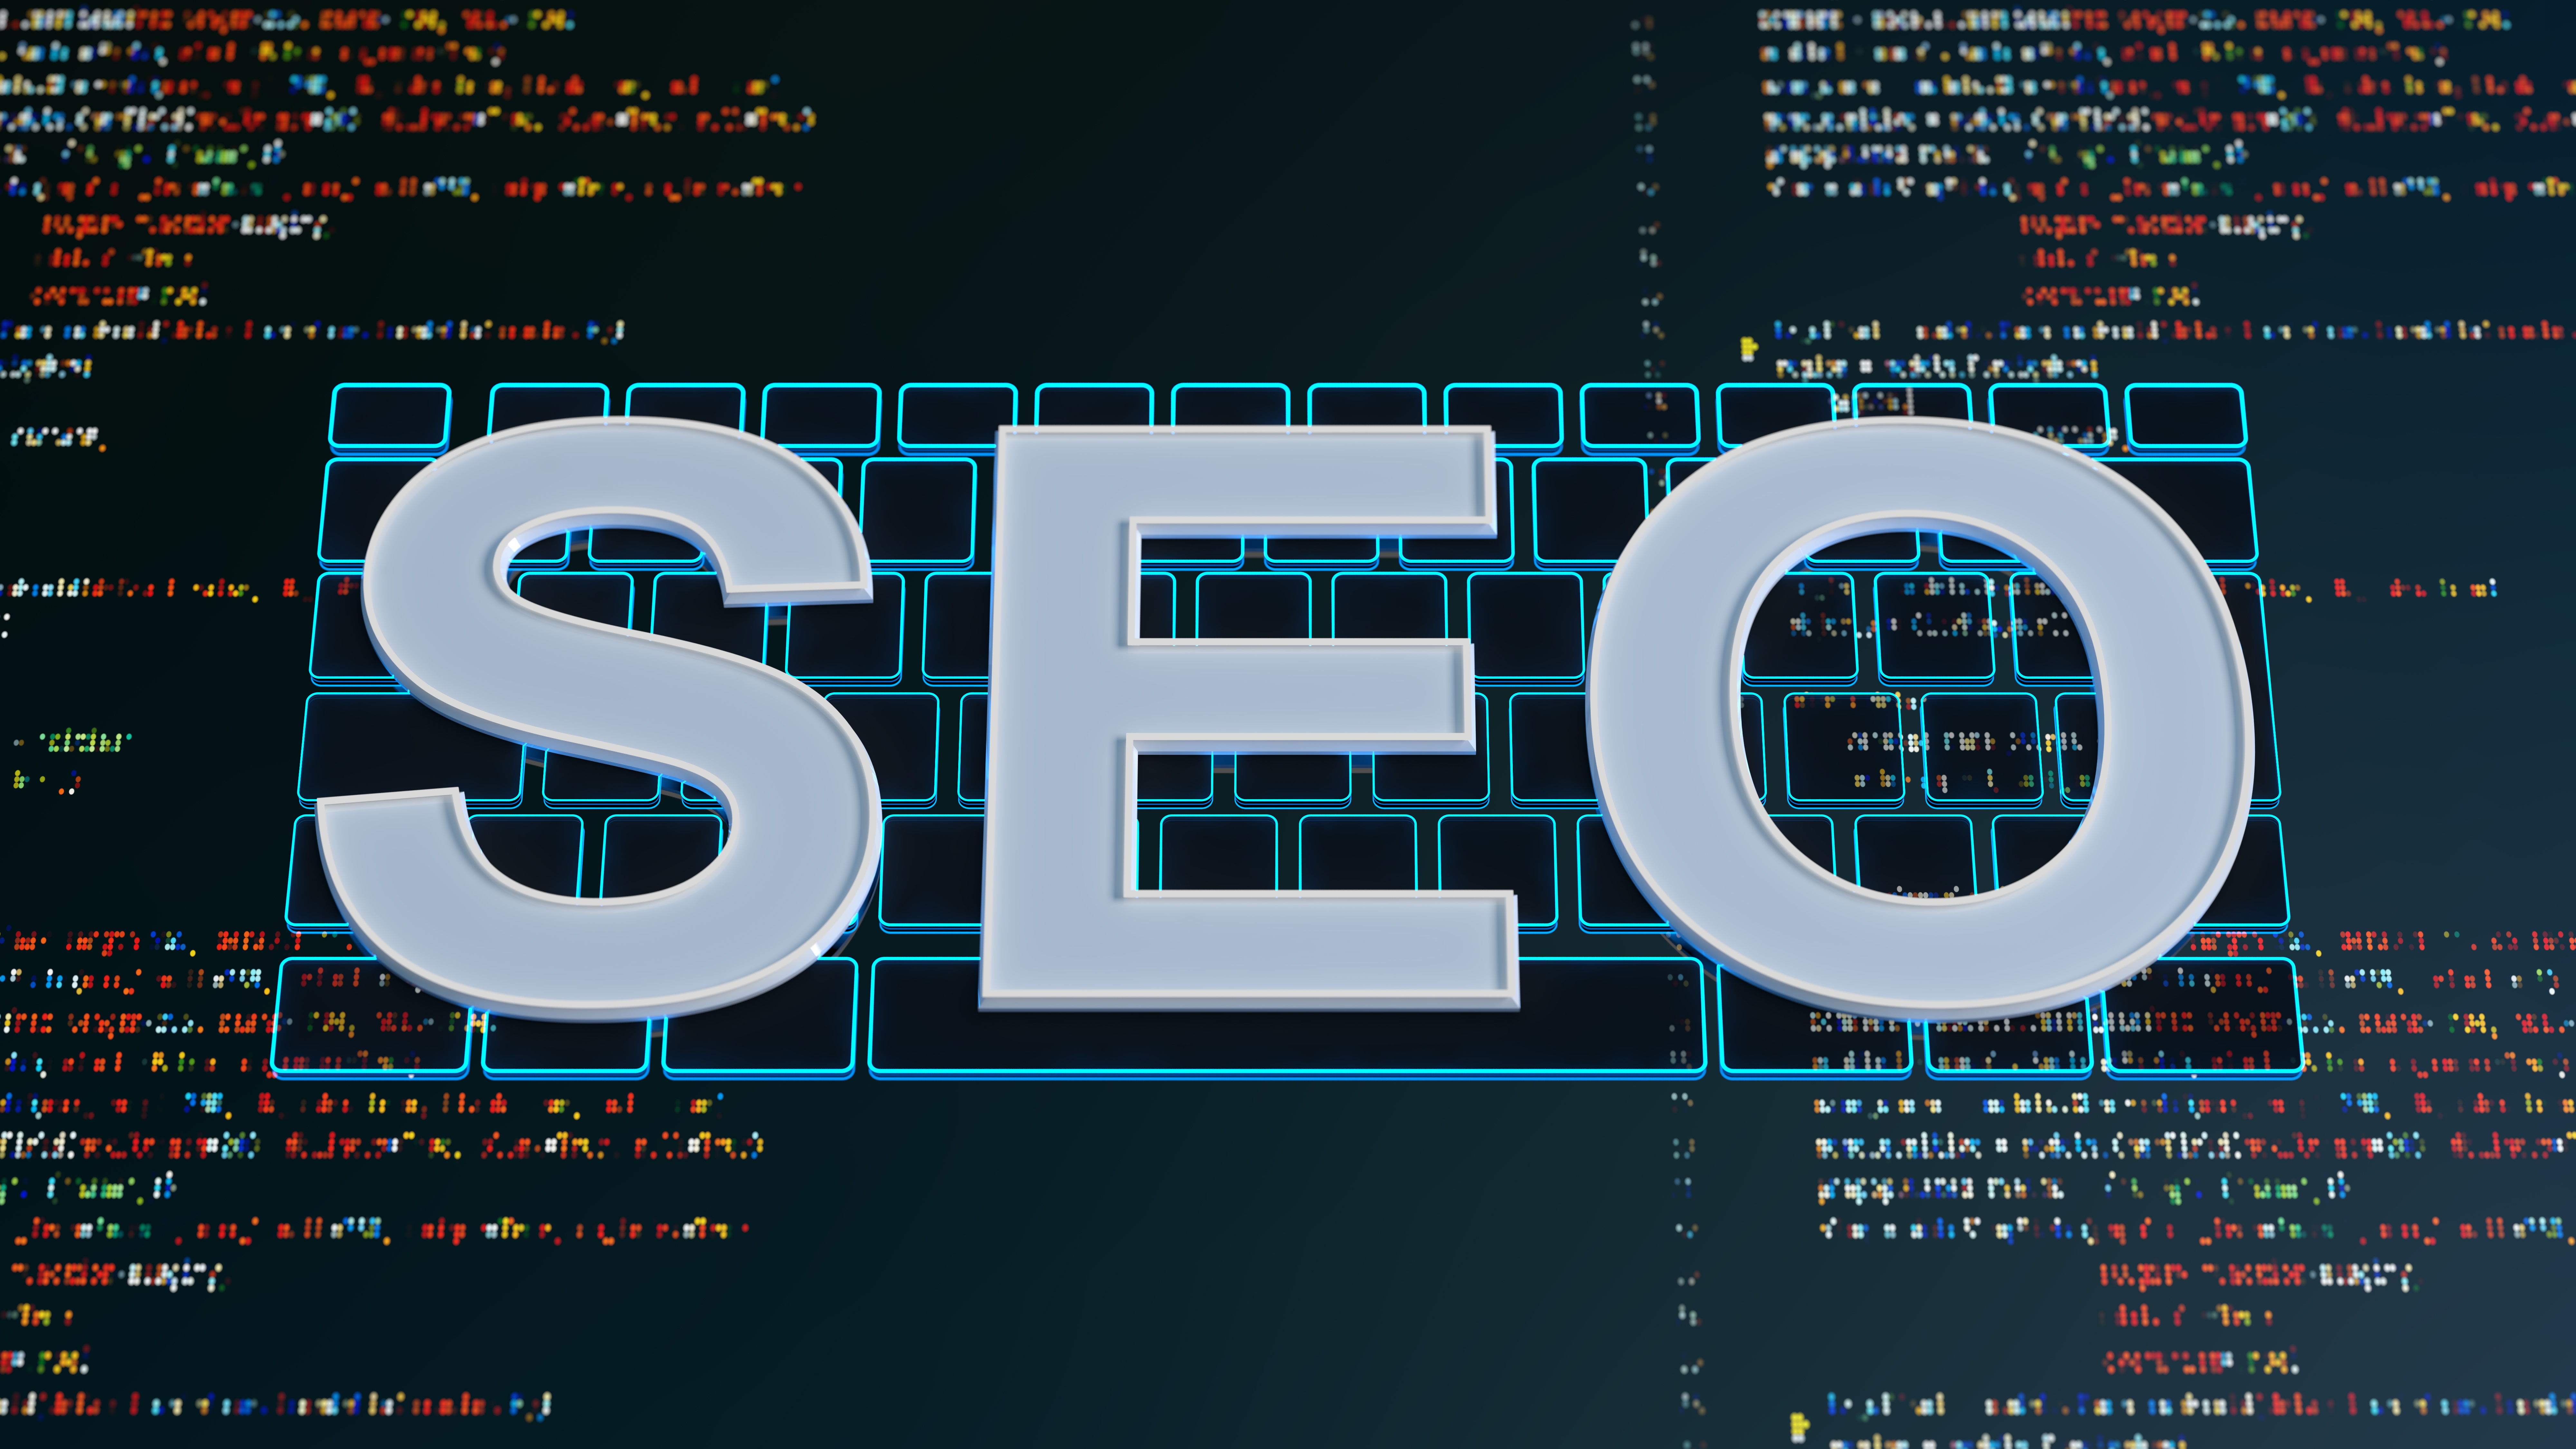 8 Simple Tips for Boosting Your Law Firm’s SEO